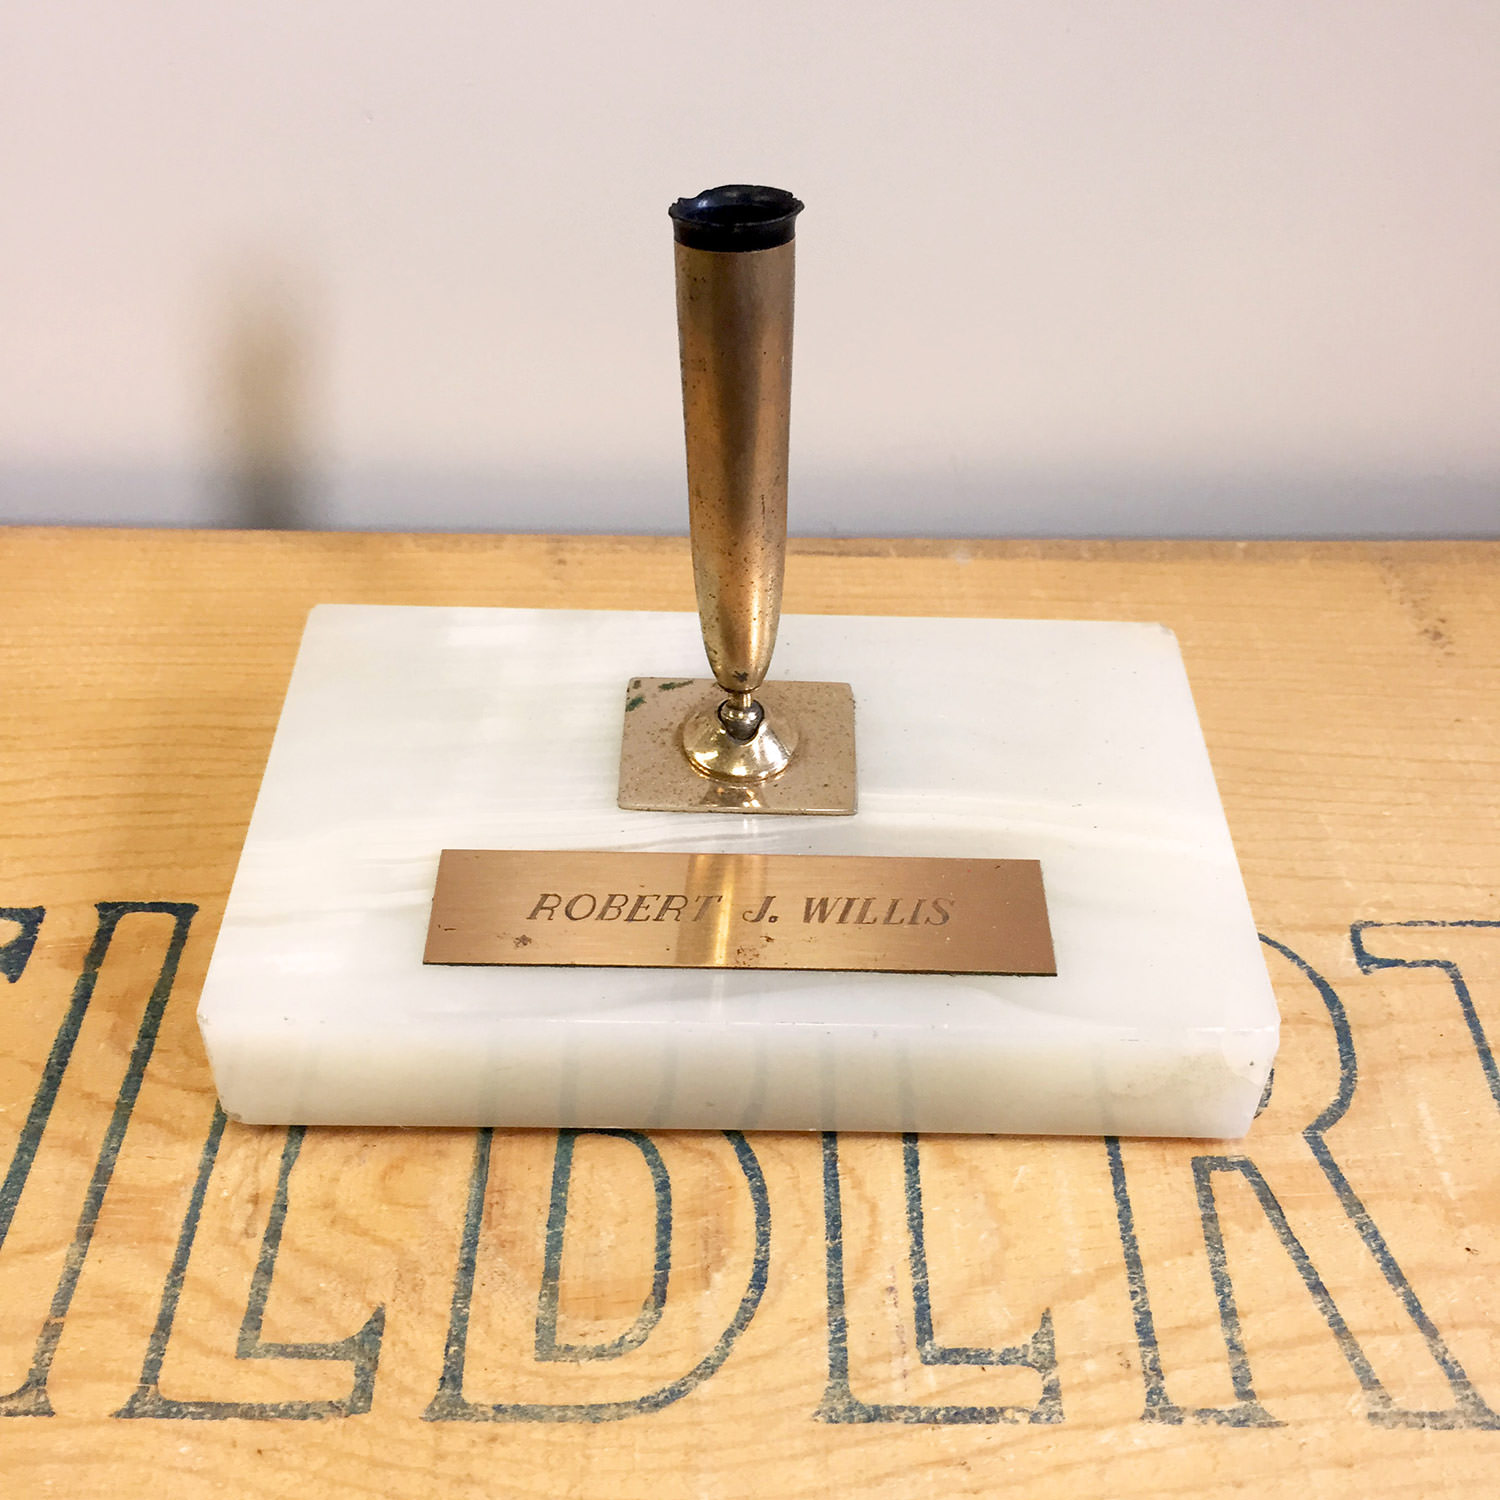 Vintage Marble Pen Stand 3×5 with name plaque Robert J. Willis